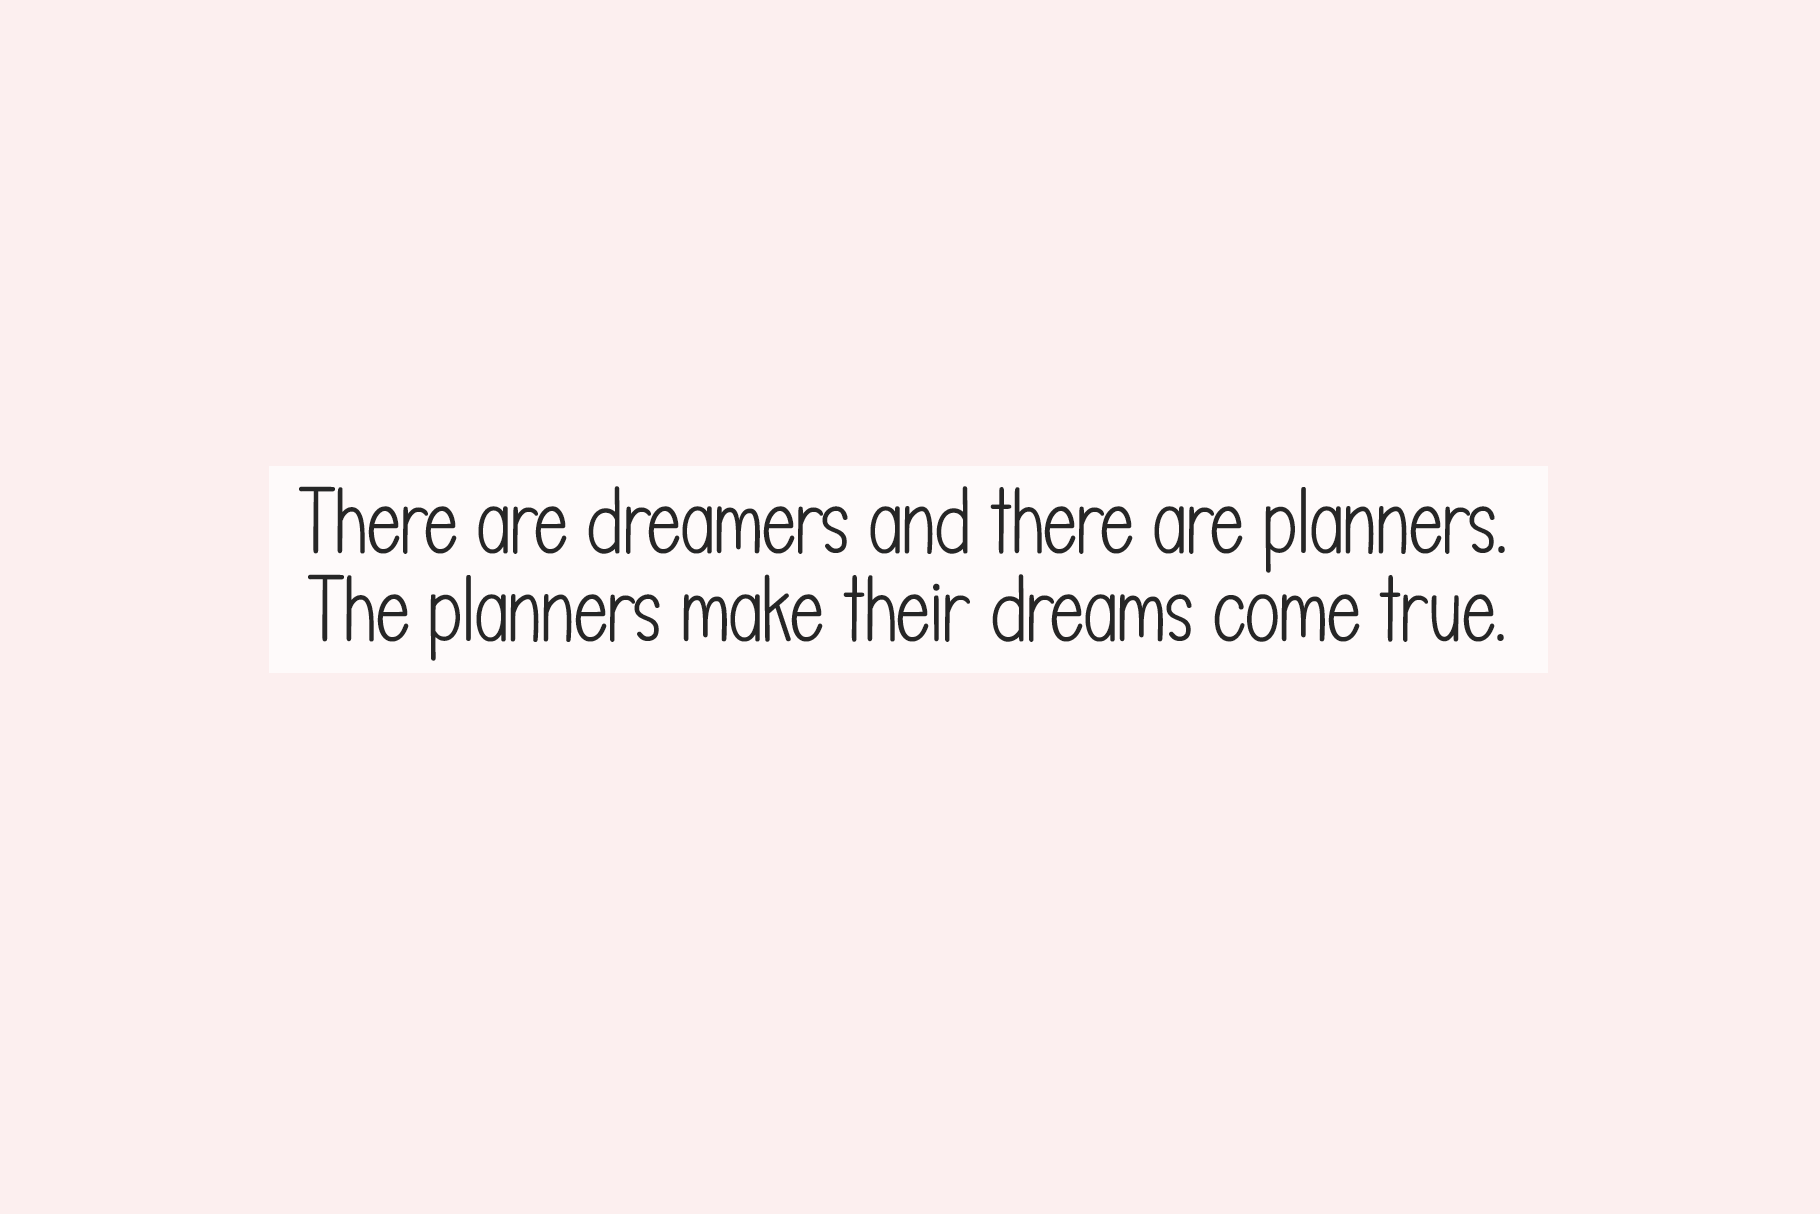 There are dreamers and there are planners; the planners make their